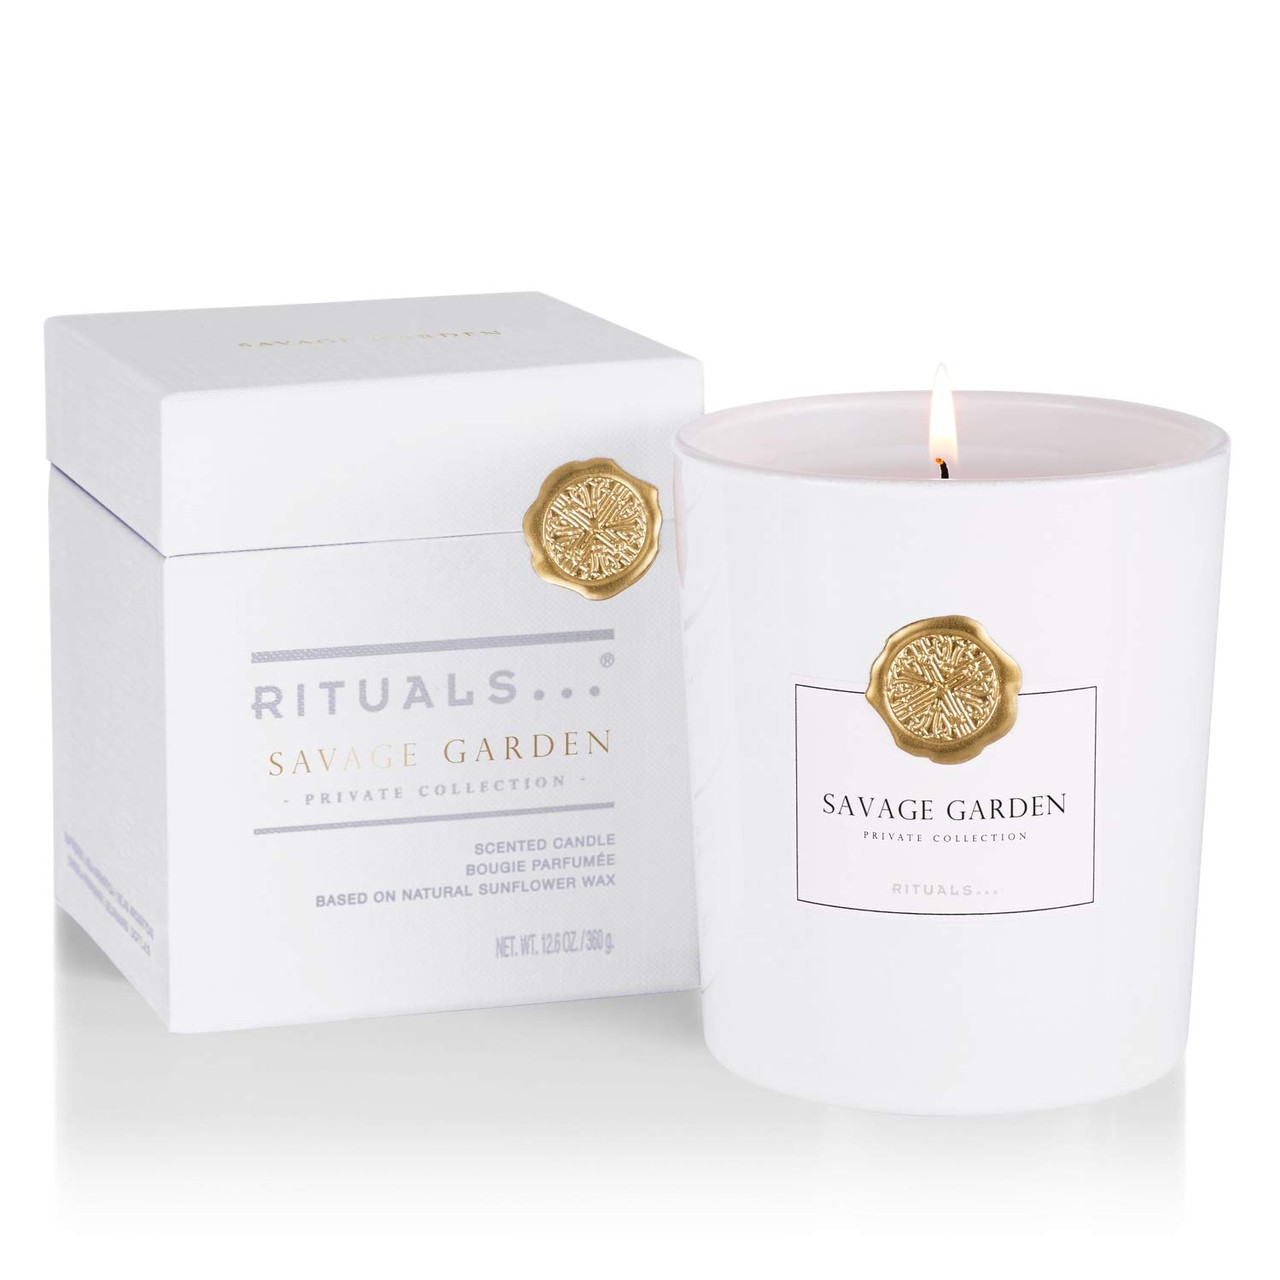 RITUALS Savage Garden Luxury Home Decor Scented Candle with Clary Sage -  12.6 Oz